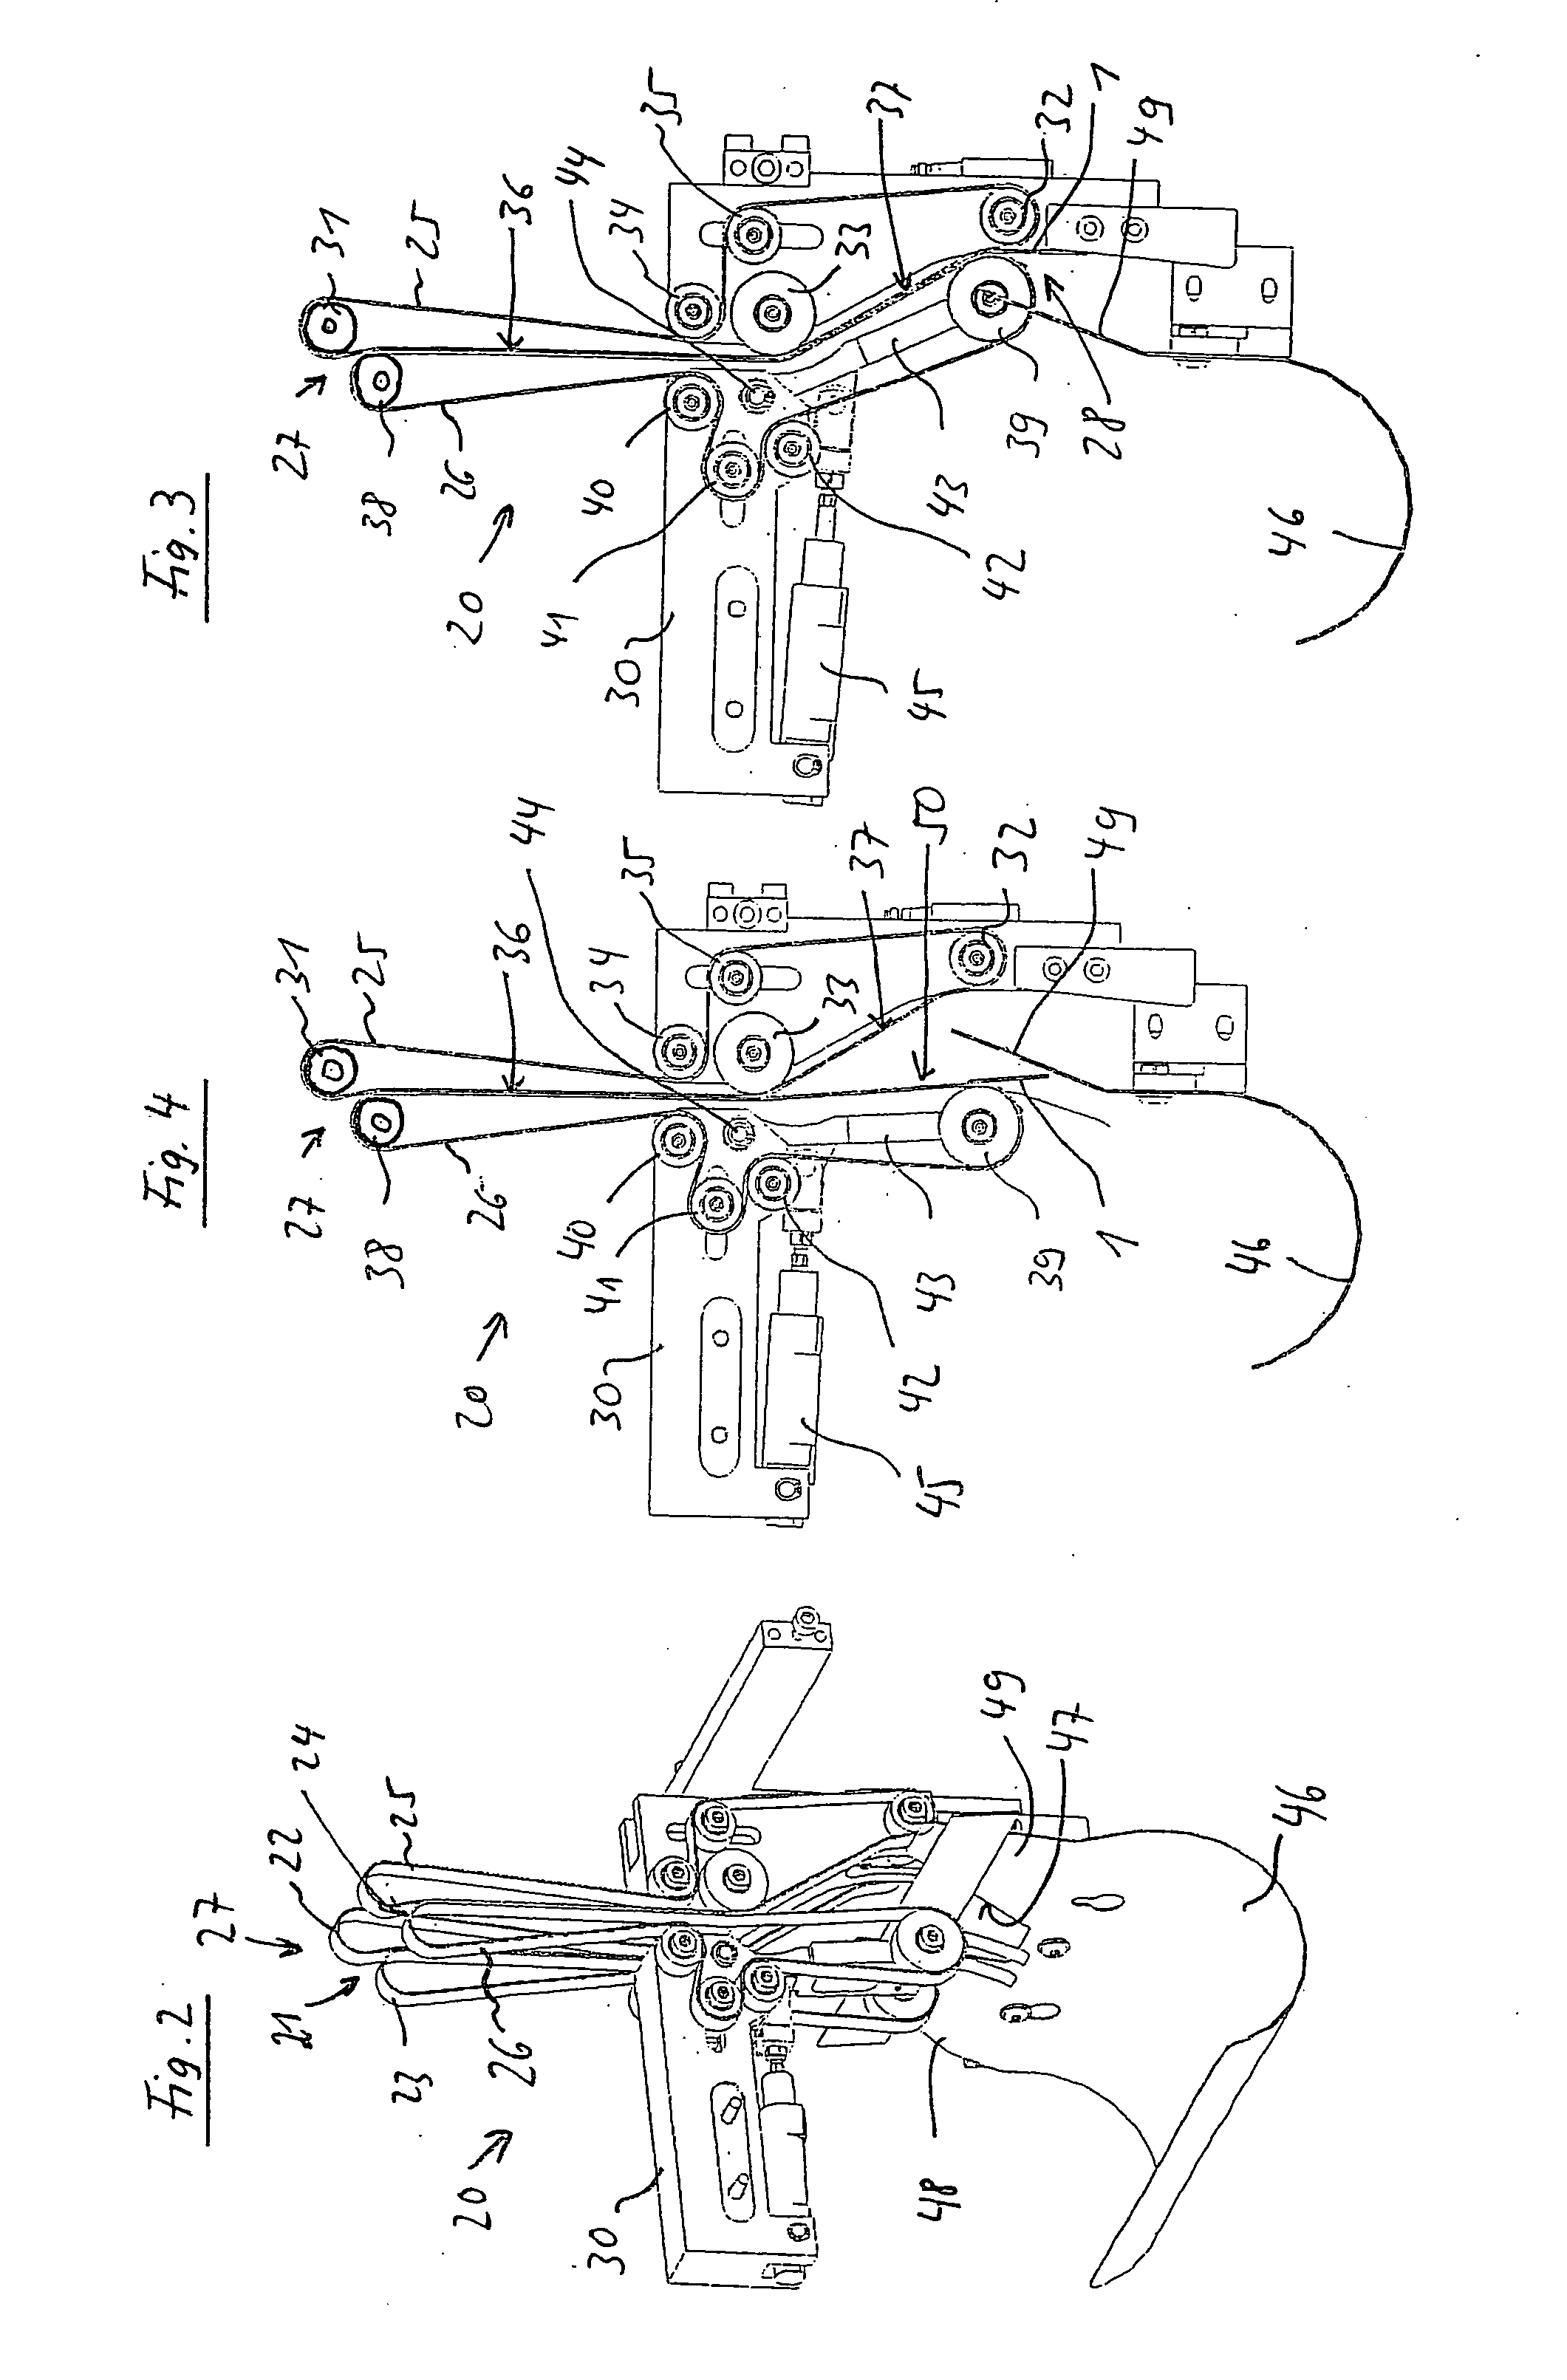 Device for guiding a brochure from a stock-piling device to a brochure conveying device